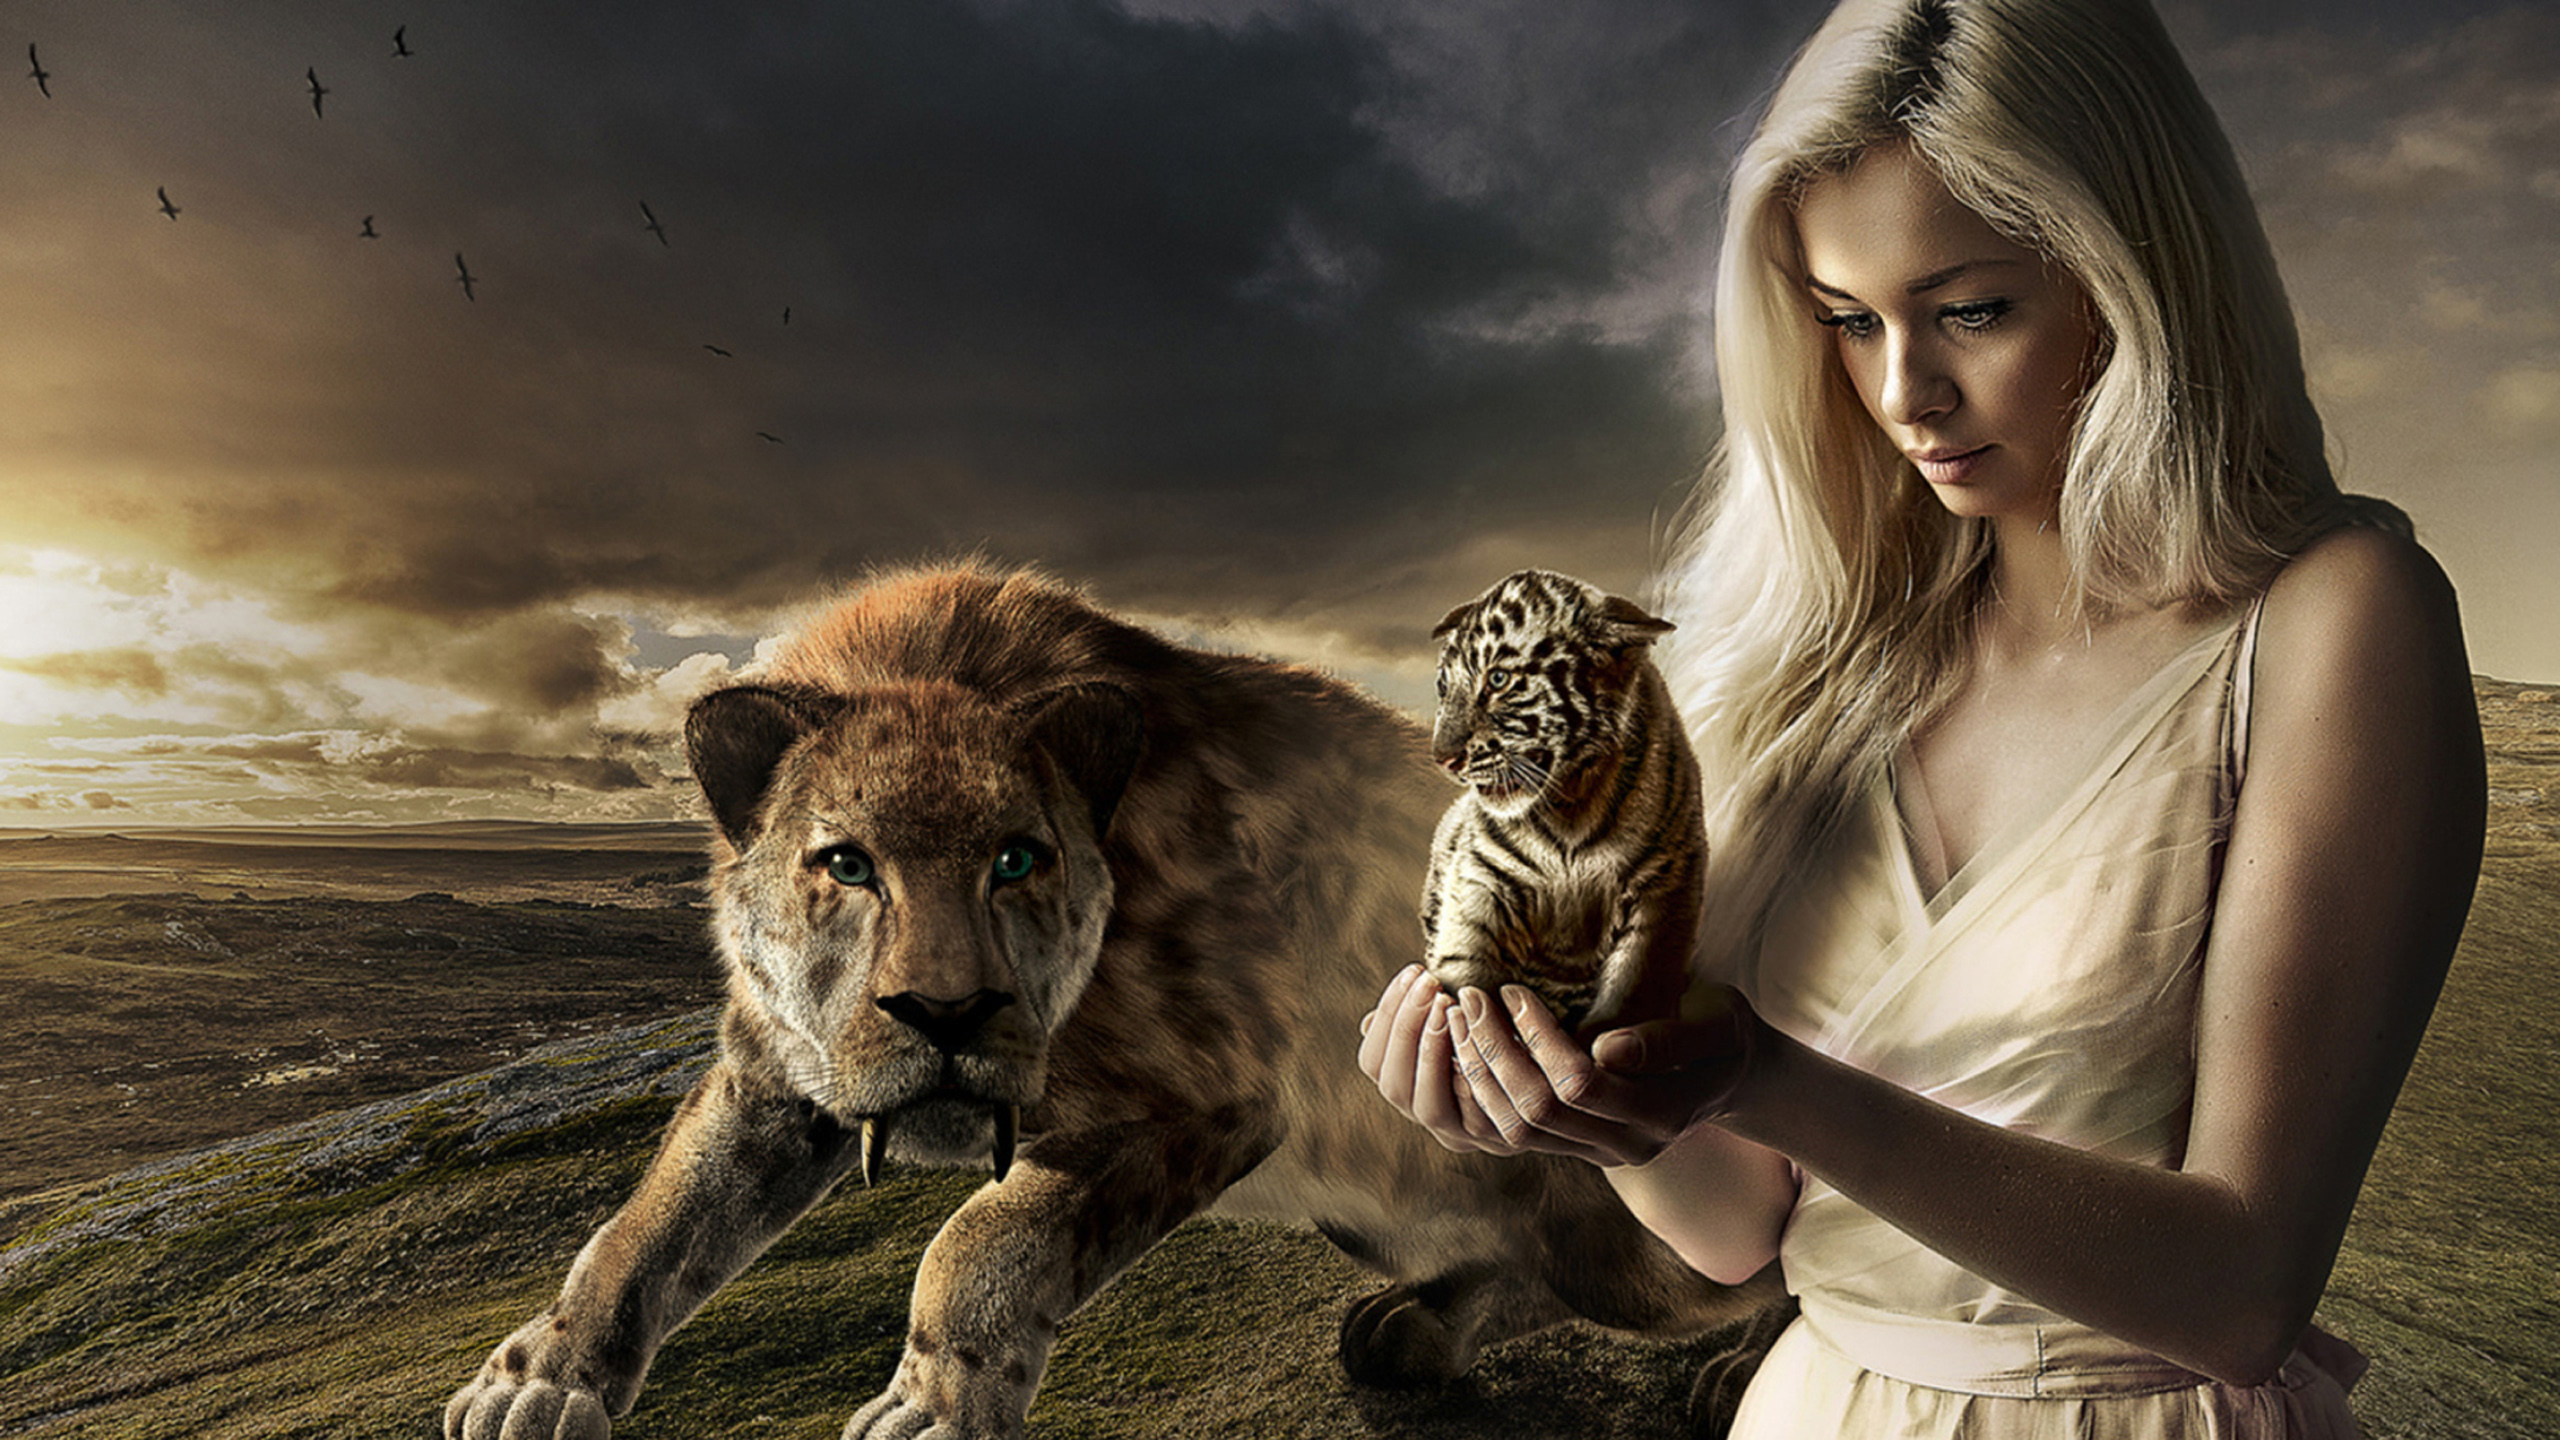 Blue Girl With Tiger Desktop Wallpaper Hd For Mobile Phones And Laptops :  